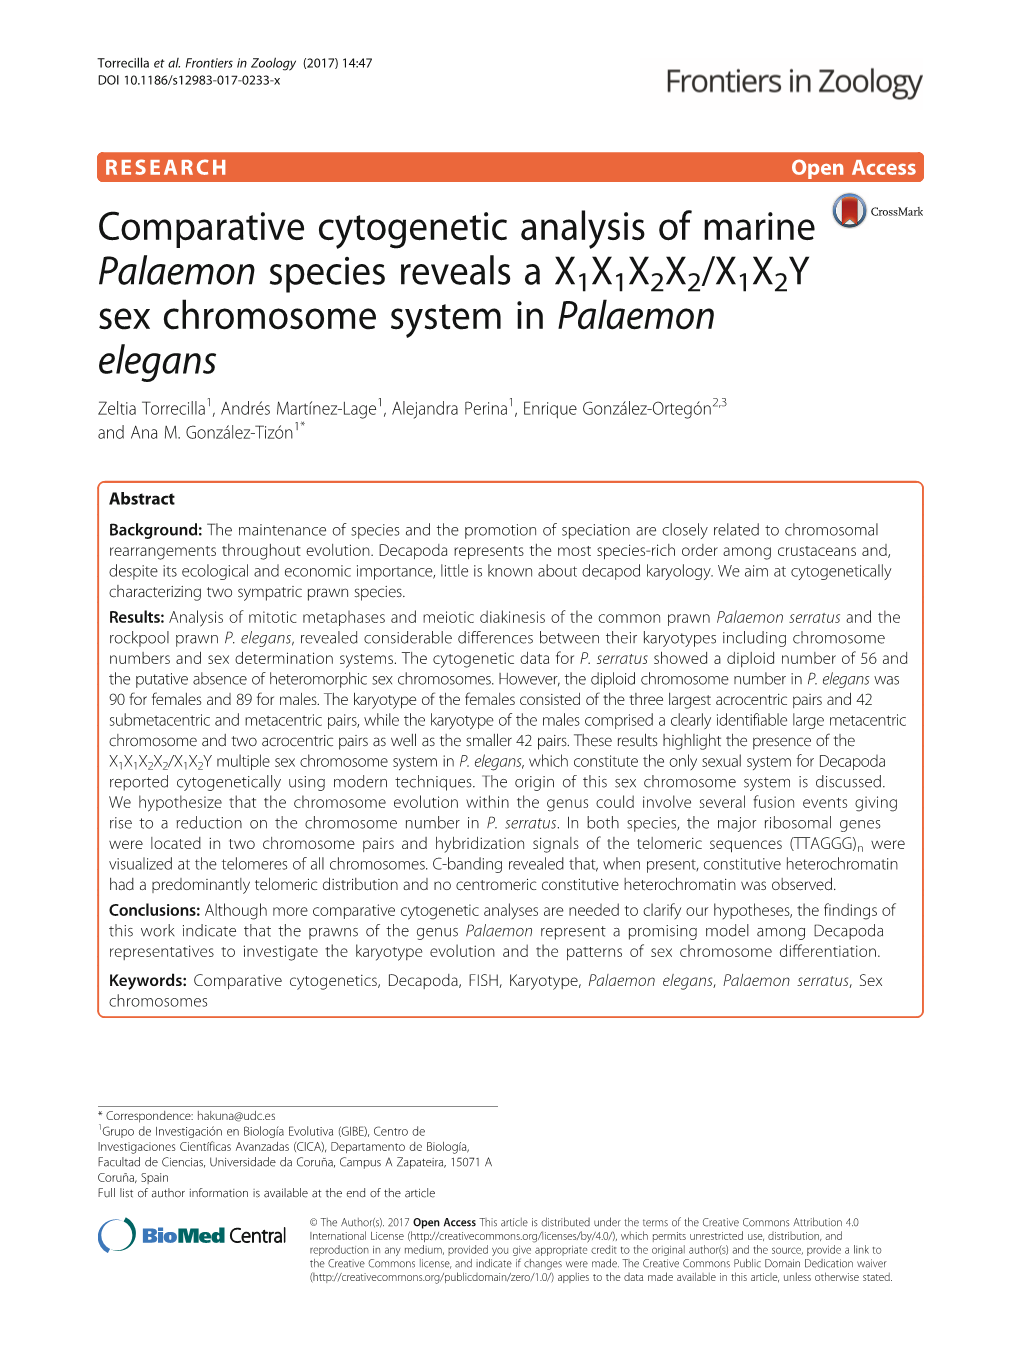 Comparative Cytogenetic Analysis of Marine Palaemon Species Reveals A